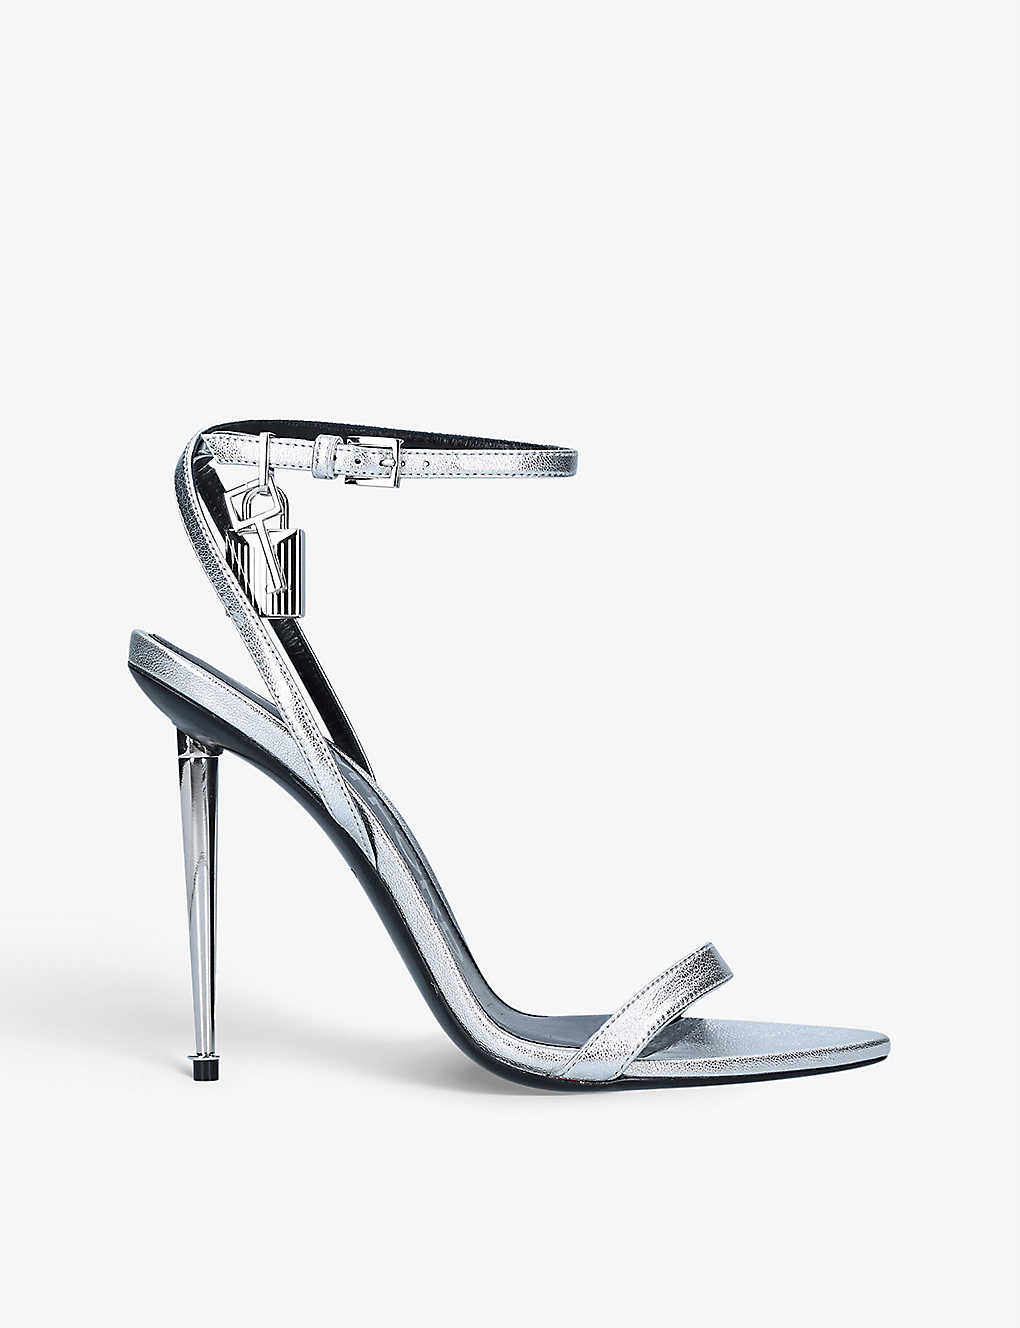 Shop Tom Ford Women's Silver Padlock Leather Heeled Sandals